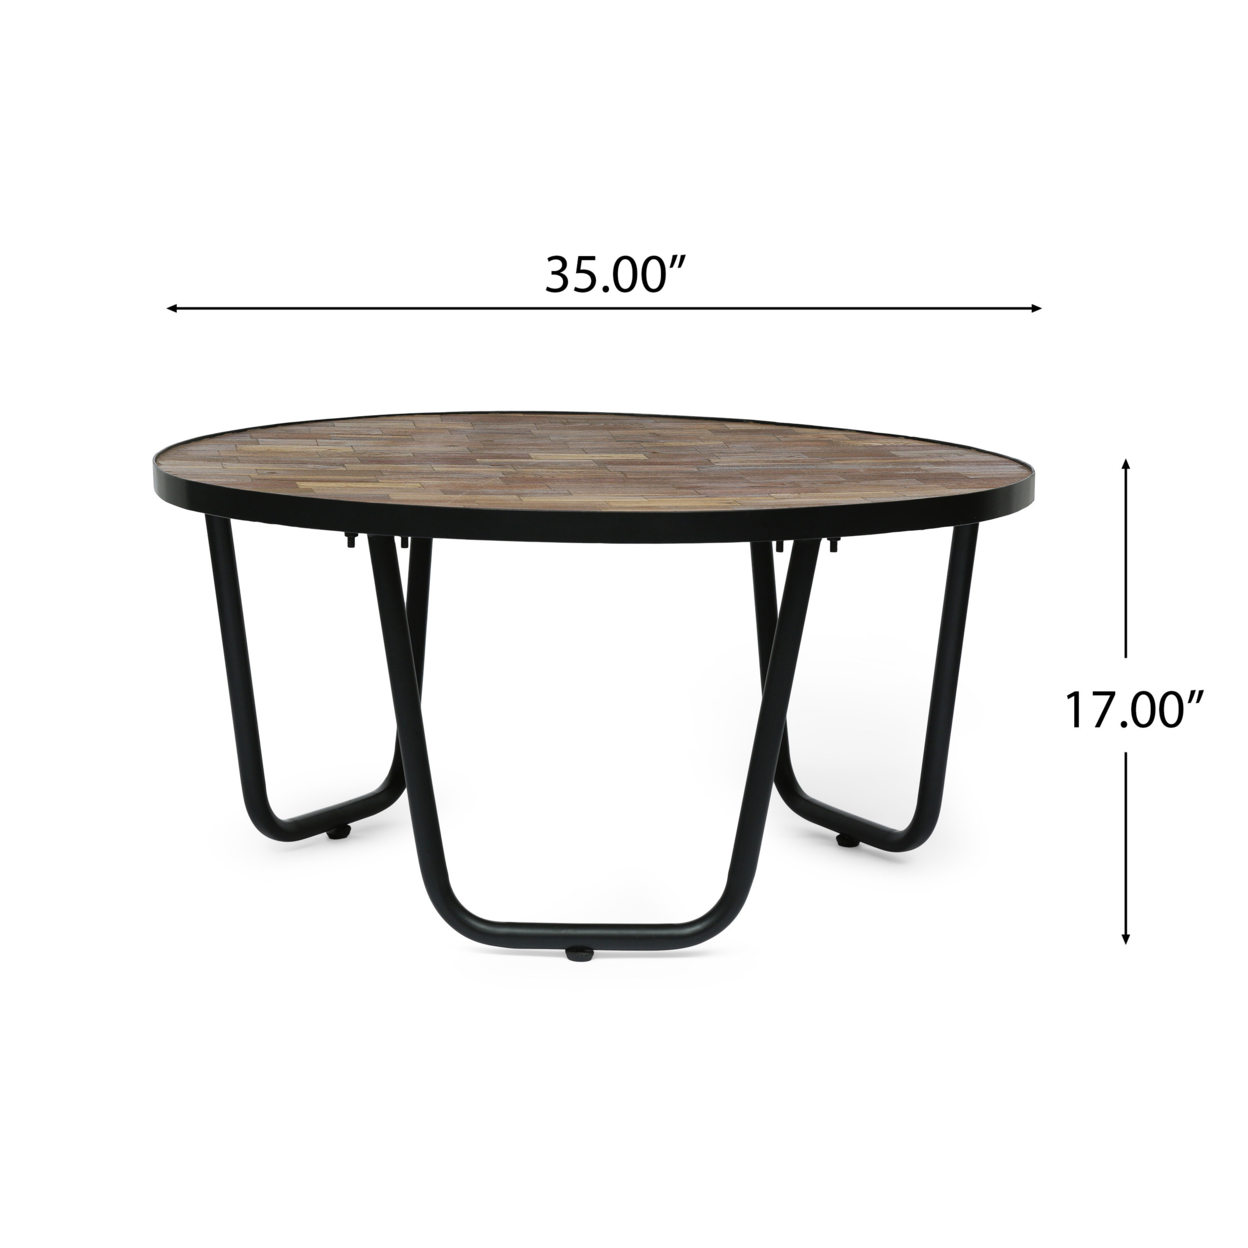 Wiers Modern Industrial Handcrafted Wooden Coffee Table, Natural And Black